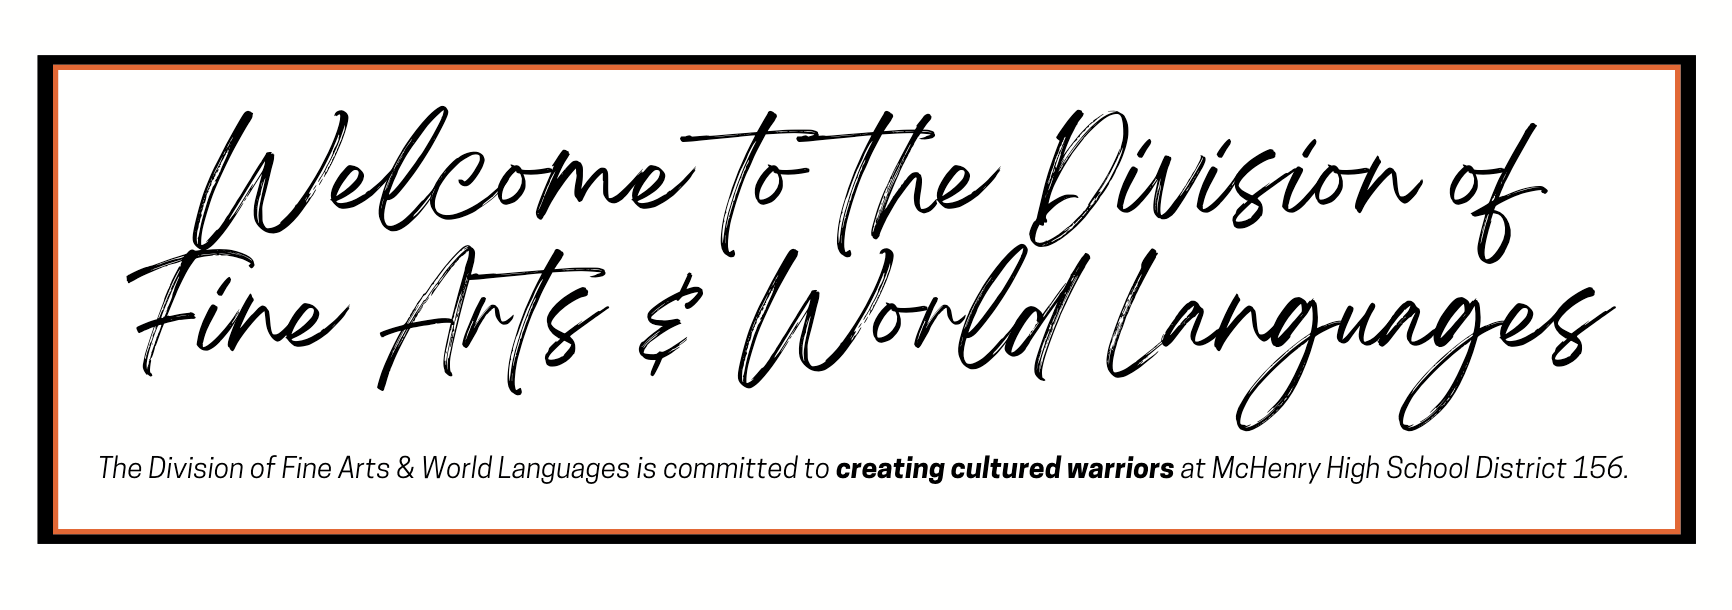 Welcome to the Division of Fine Arts and World Languages. The Division of Fine Arts and World Languages is committed to creating cultured warriors at McHenry High School District 156